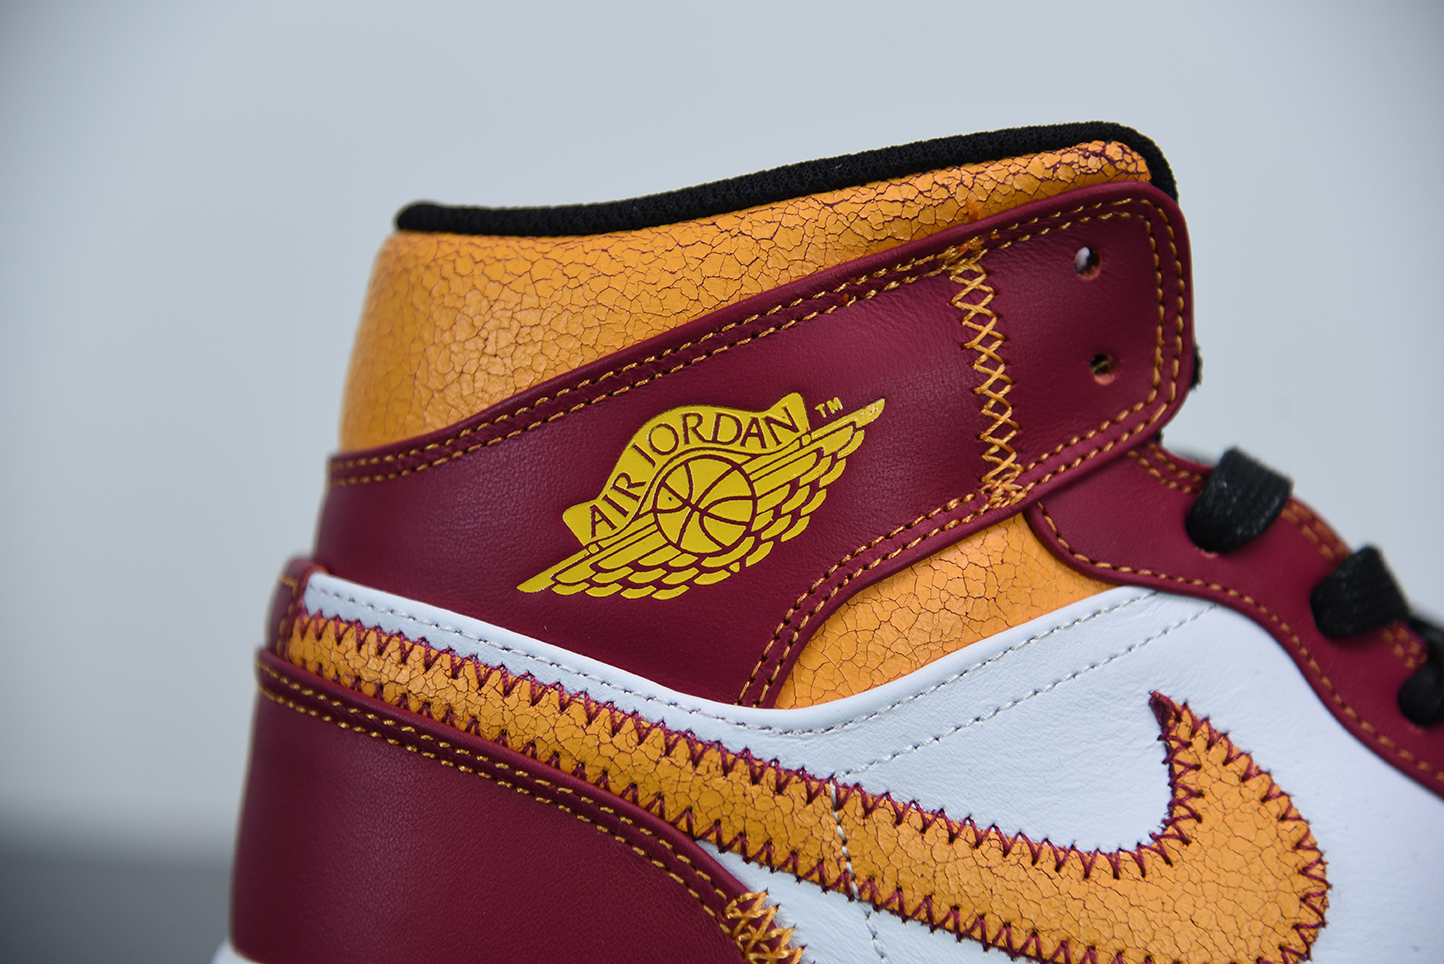 Air Jordan 1 Mid “Day of the Dead” For Sale – The Sole Line